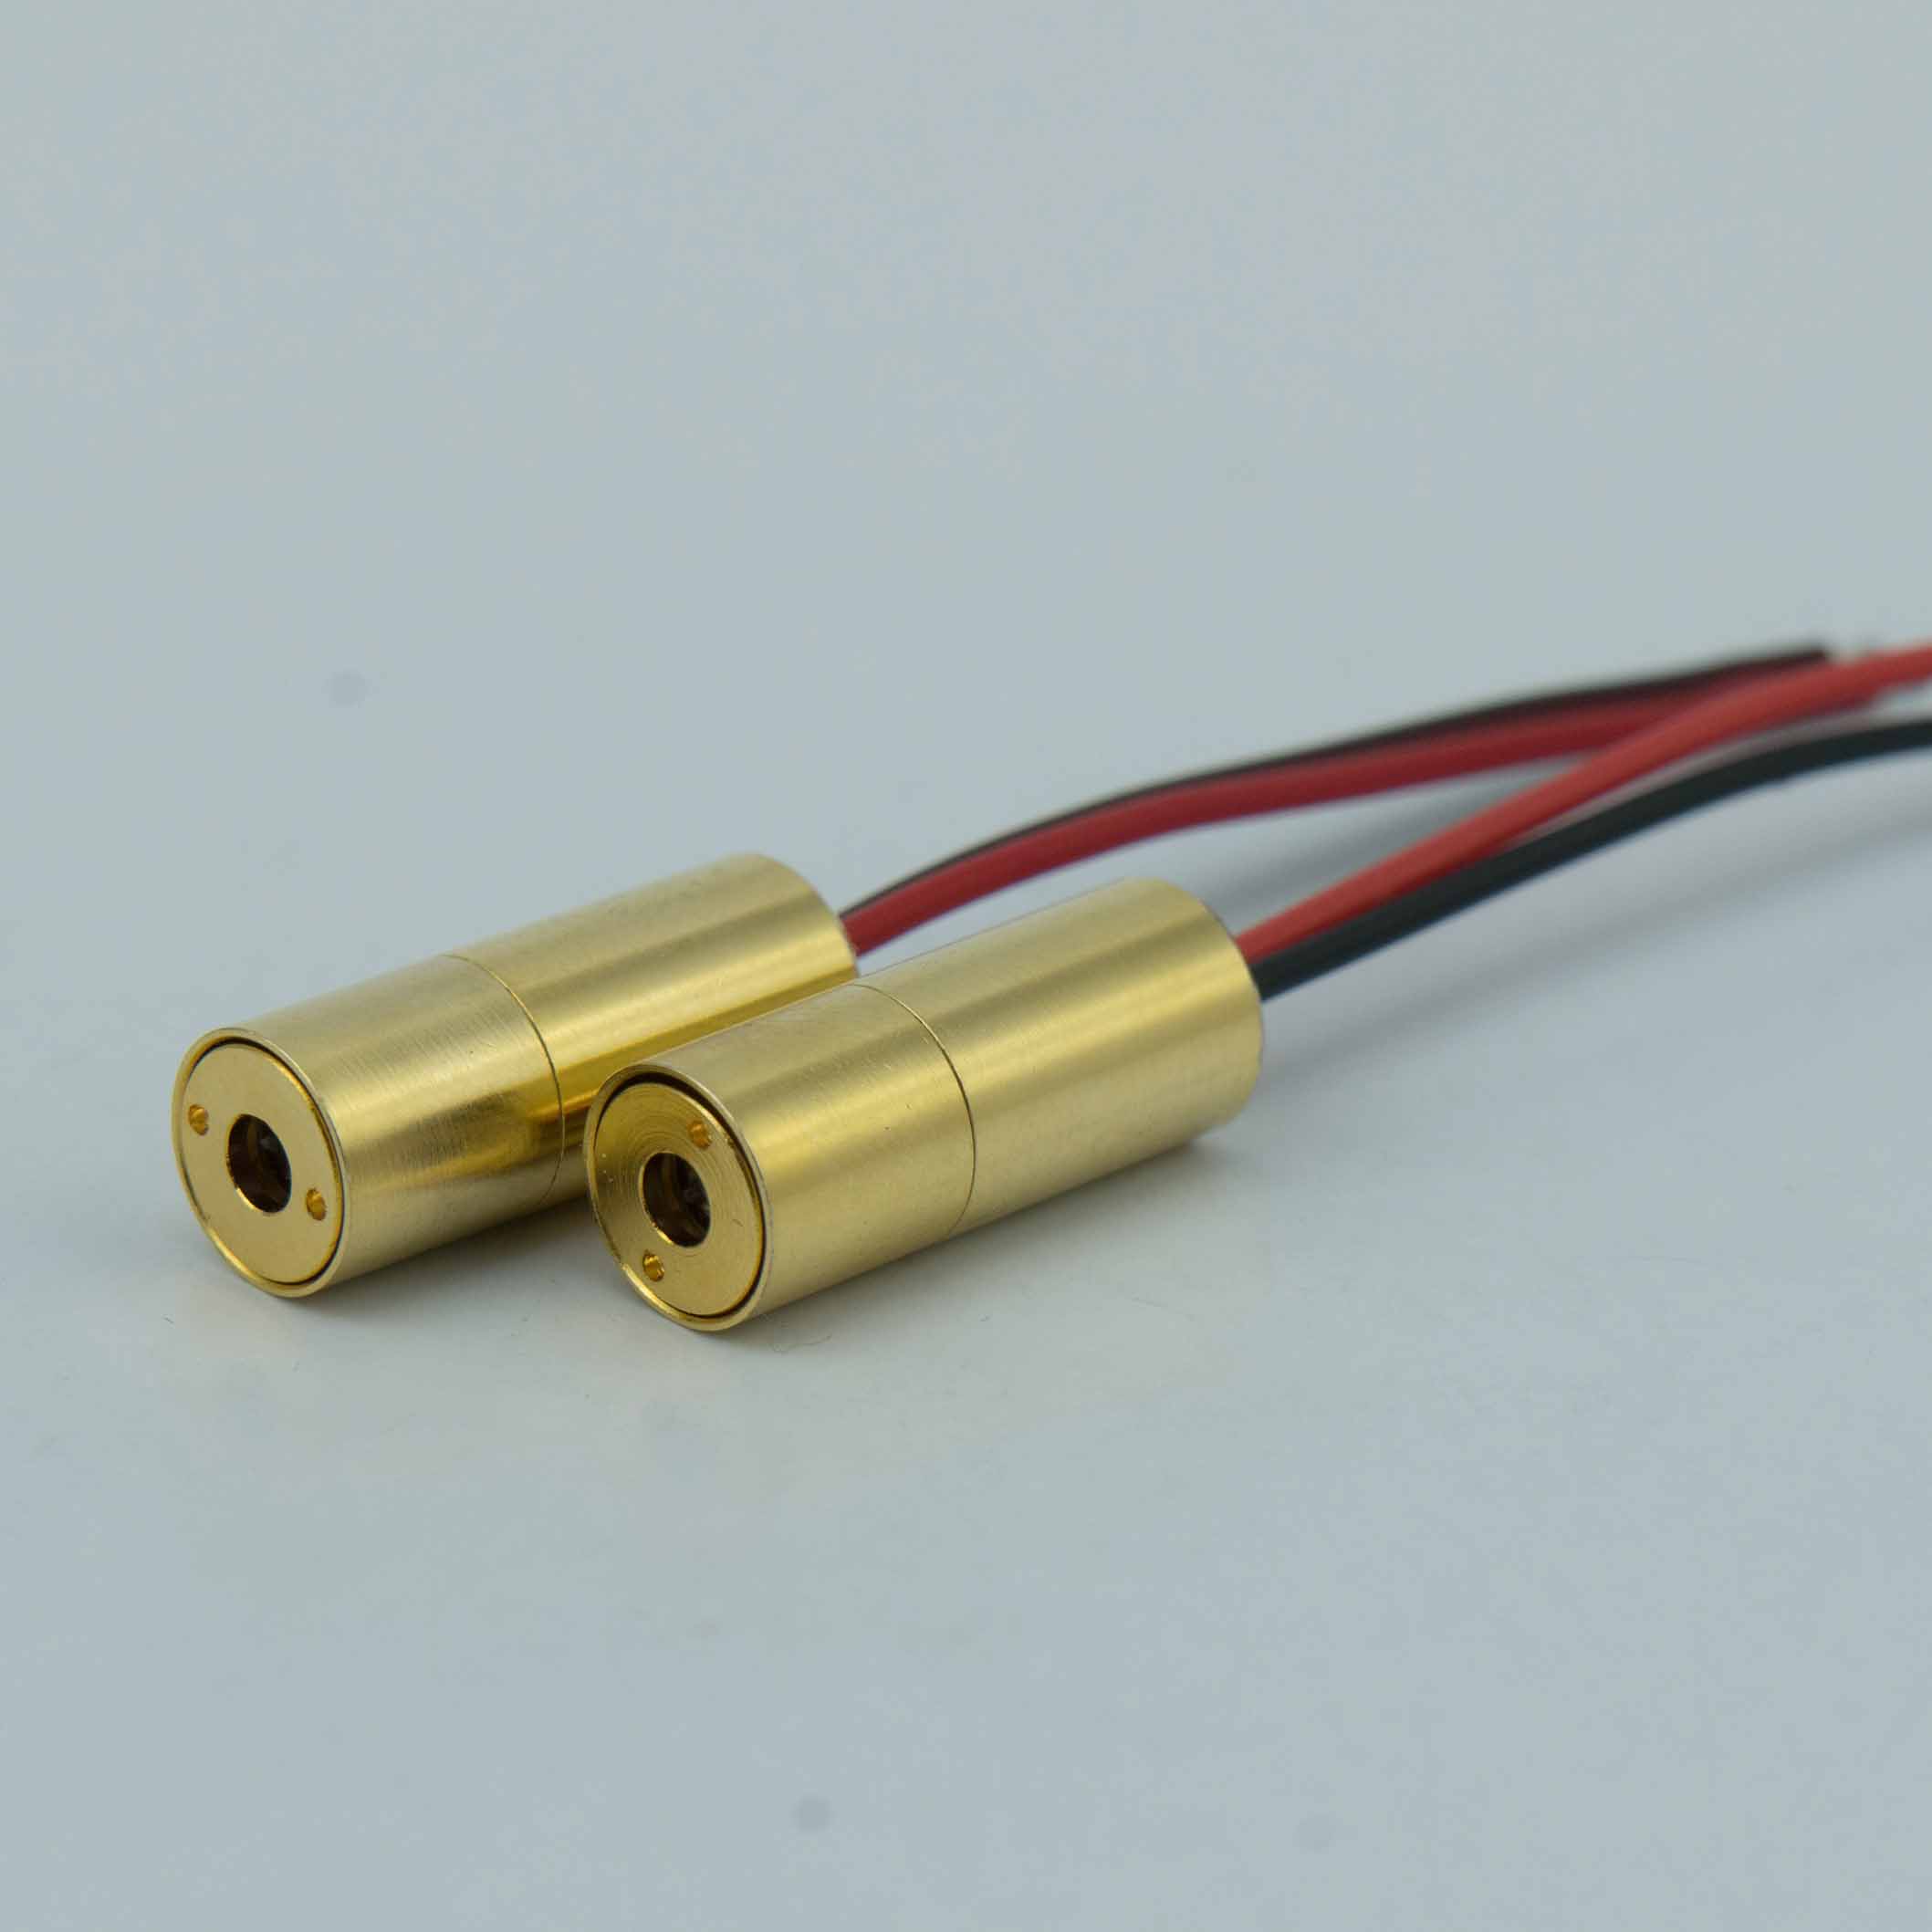 650nm 1mW Class II Red Laser Diode Module for Medical Laser Instrument